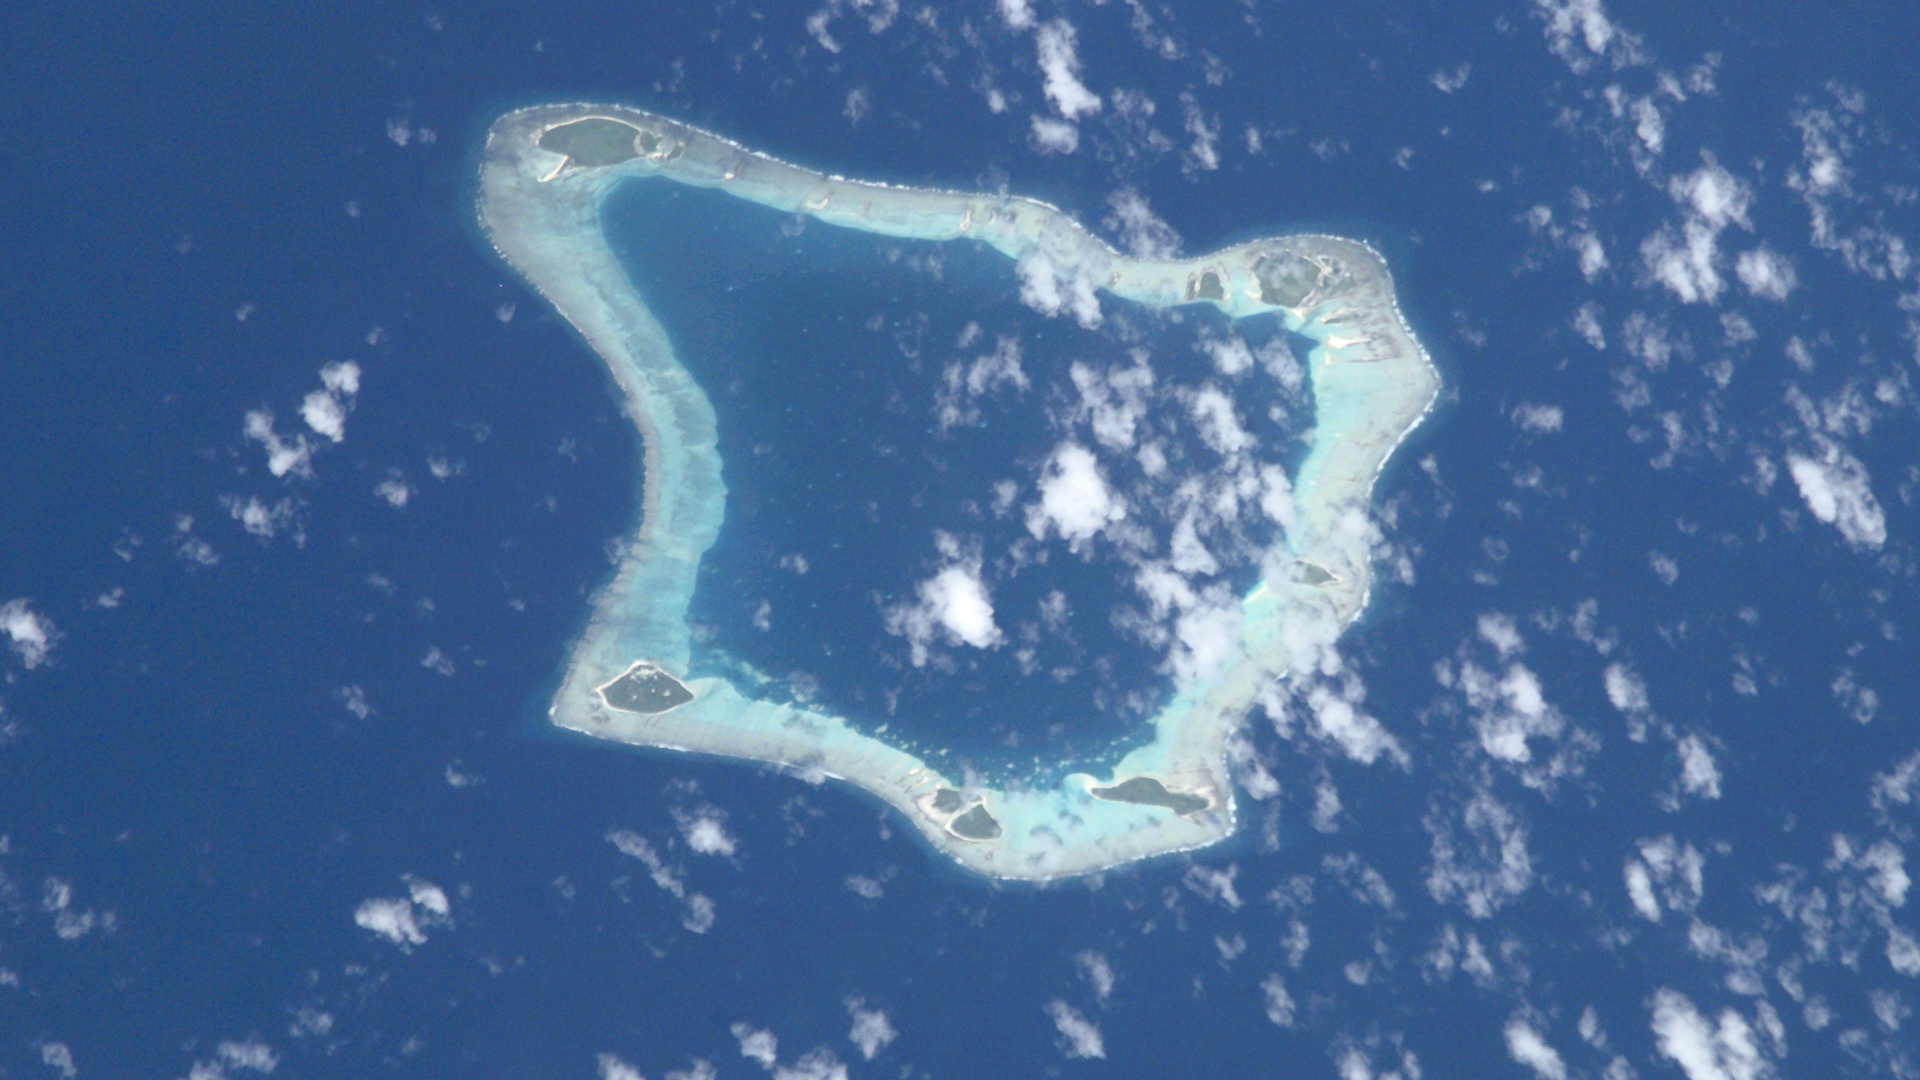 <p><strong>Estimated cost:</strong> $2,025 + cost of boat to the island</p> <p>Described as the "island at the end of the earth" by the BBC, Palmerston Island is part of the Cook Islands, which are a small group of islands that are connected by a coral reef. Planes and helicopters cannot land there, so the only access is by boat.</p> <p>Palmerston lies approximately 300 miles northwest of Rarotonga, which is where you can possibly find a boat to take you to this remote, yet beautiful, location. Apparently, only those with a determined and adventurous spirit should consider this journey across the Pacific to one of the most isolated places on earth, which takes somewhere around nine days to complete, according to the BBC.</p> <p>When you reach Palmerston, don't expect hotel accommodations or restaurants. Instead, you'll be hosted by a family who lives on the island and will dine on meals of fresh fish that they prepare for you, according to the Palmerston Island website.</p> <p><strong>How to get there: </strong>Getting to Palmerston Island takes some careful planning because it's only accessible by boat, and the availability of boats varies. First, you will need to fly to Rarotonga. Once there, you will need to inquire about shipping schedules to the island via cargo or find a tourist boat willing to make the journey and agree on a price.</p> <p><strong><em>Why Is My Cash App Payment Pending? <a href="https://www.gobankingrates.com/banking/mobile/cash-app-payment-pending/?utm_term=related_link_10&utm_campaign=1224529&utm_source=msn.com&utm_content=12&utm_medium=rss" rel="">5 Reasons and Solutions</a></em></strong></p>